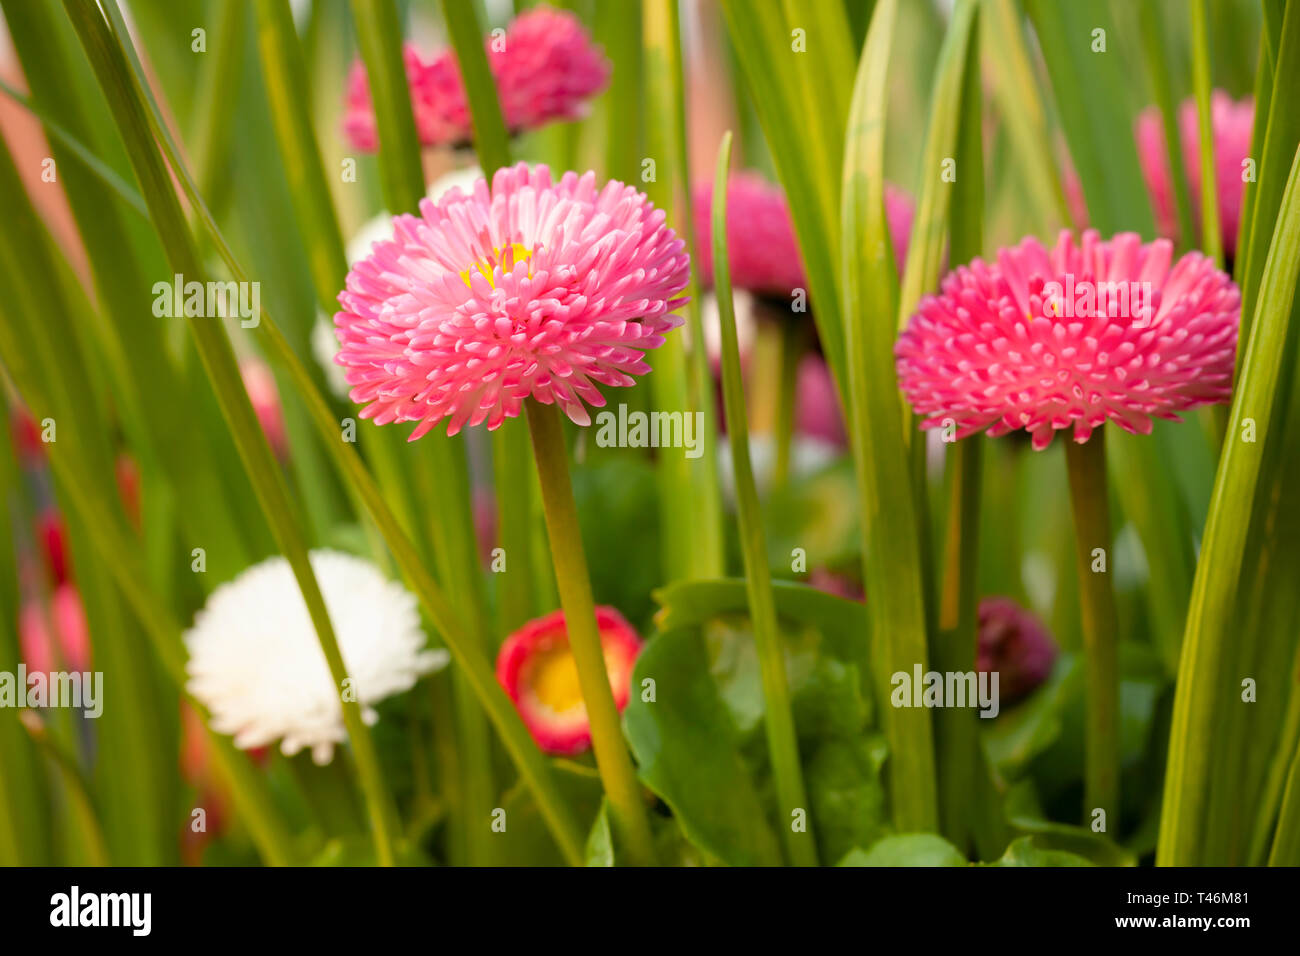 Spring daisy flowers close up with red and pink colors. Bellis perensis daisy plants and green shoots in evening sun. Stock Photo